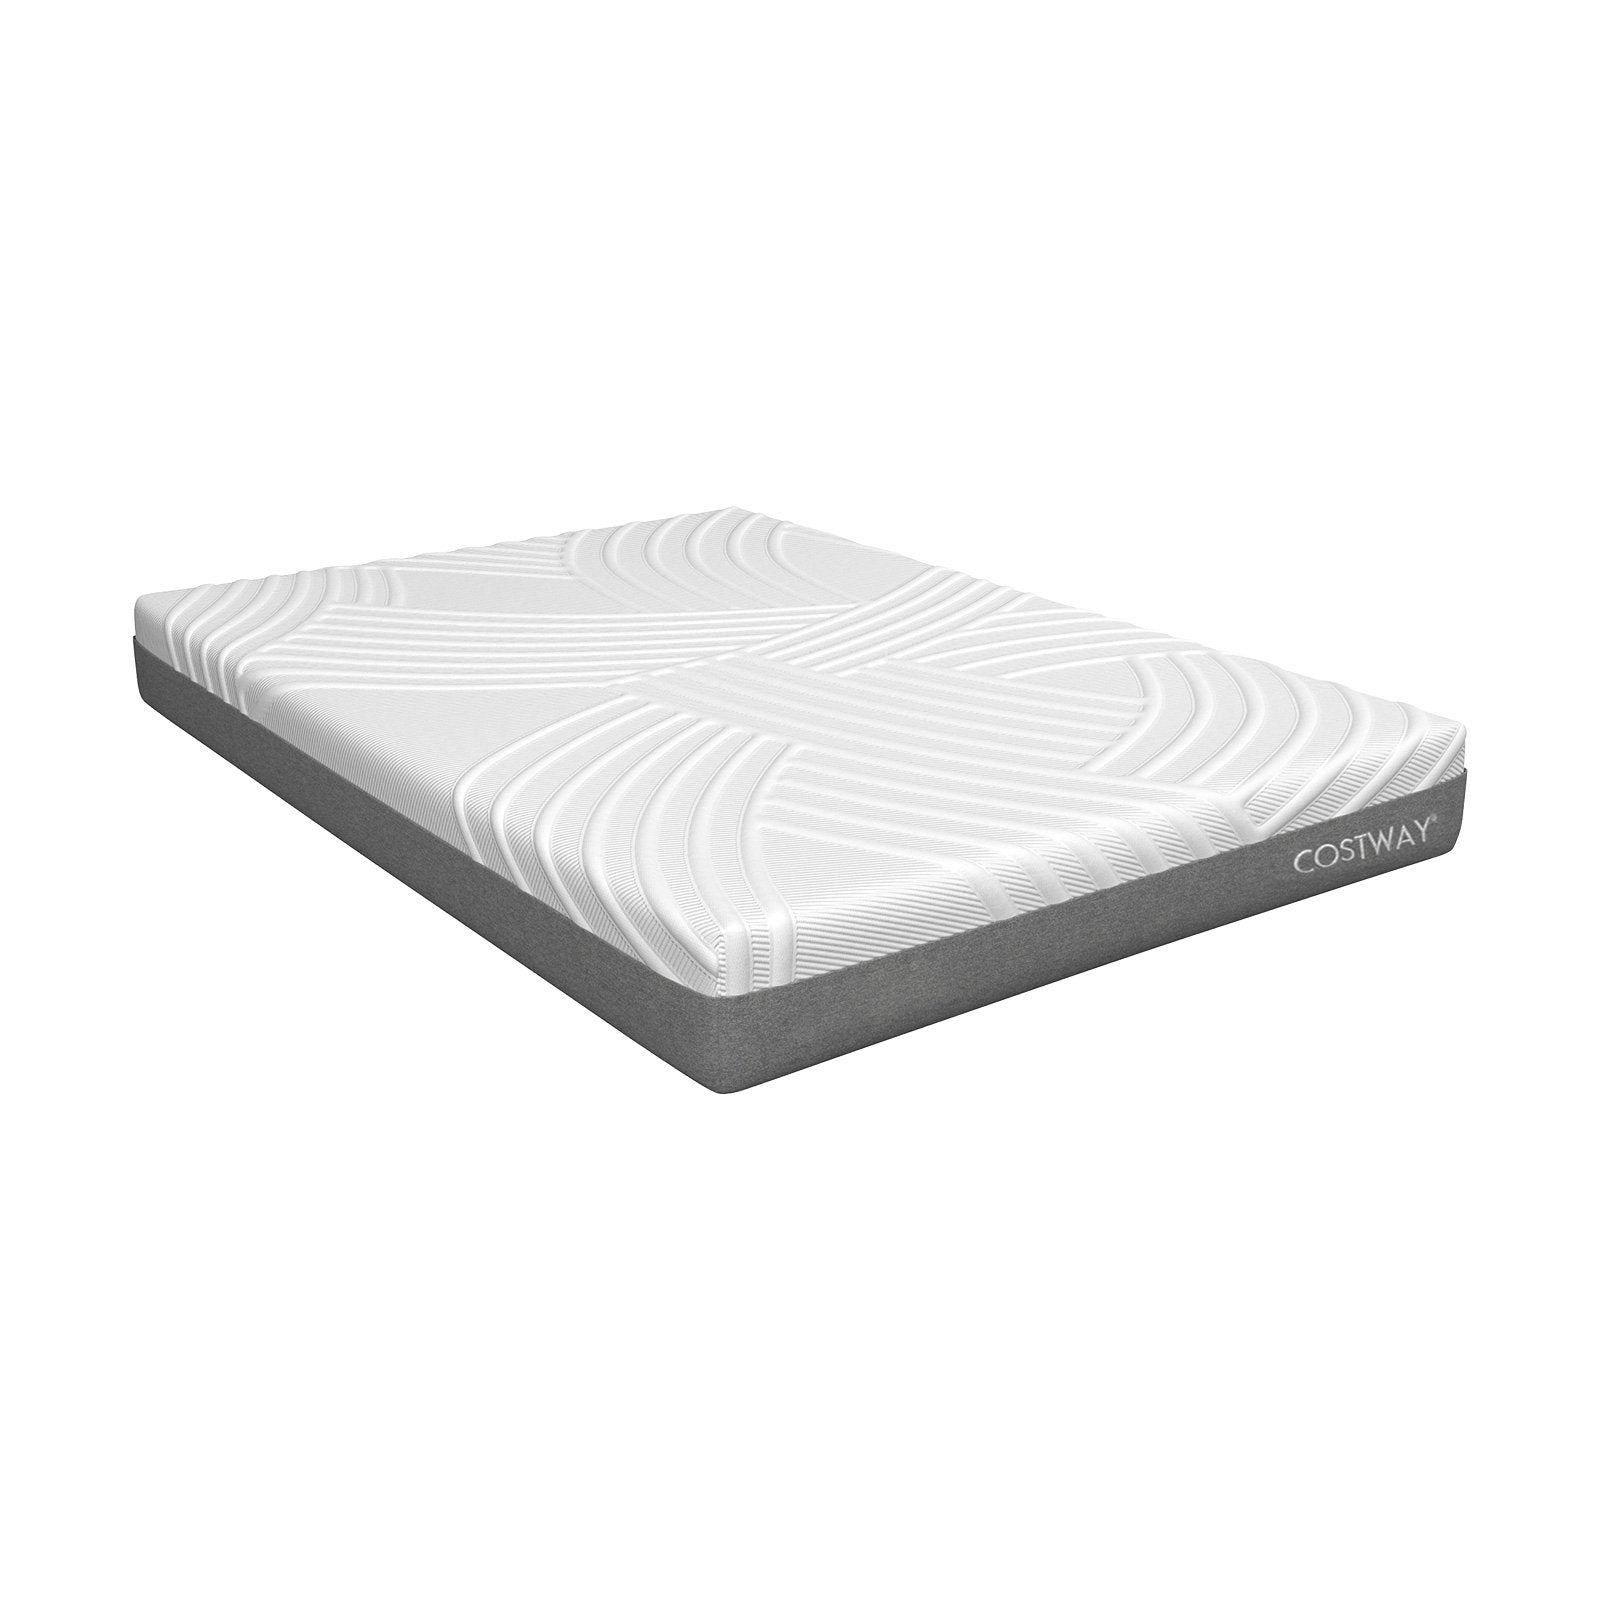 75L x 54W x 8H Memory Foam Mattress with Jacquard Fabric Cover-Full Size, White at Gallery Canada